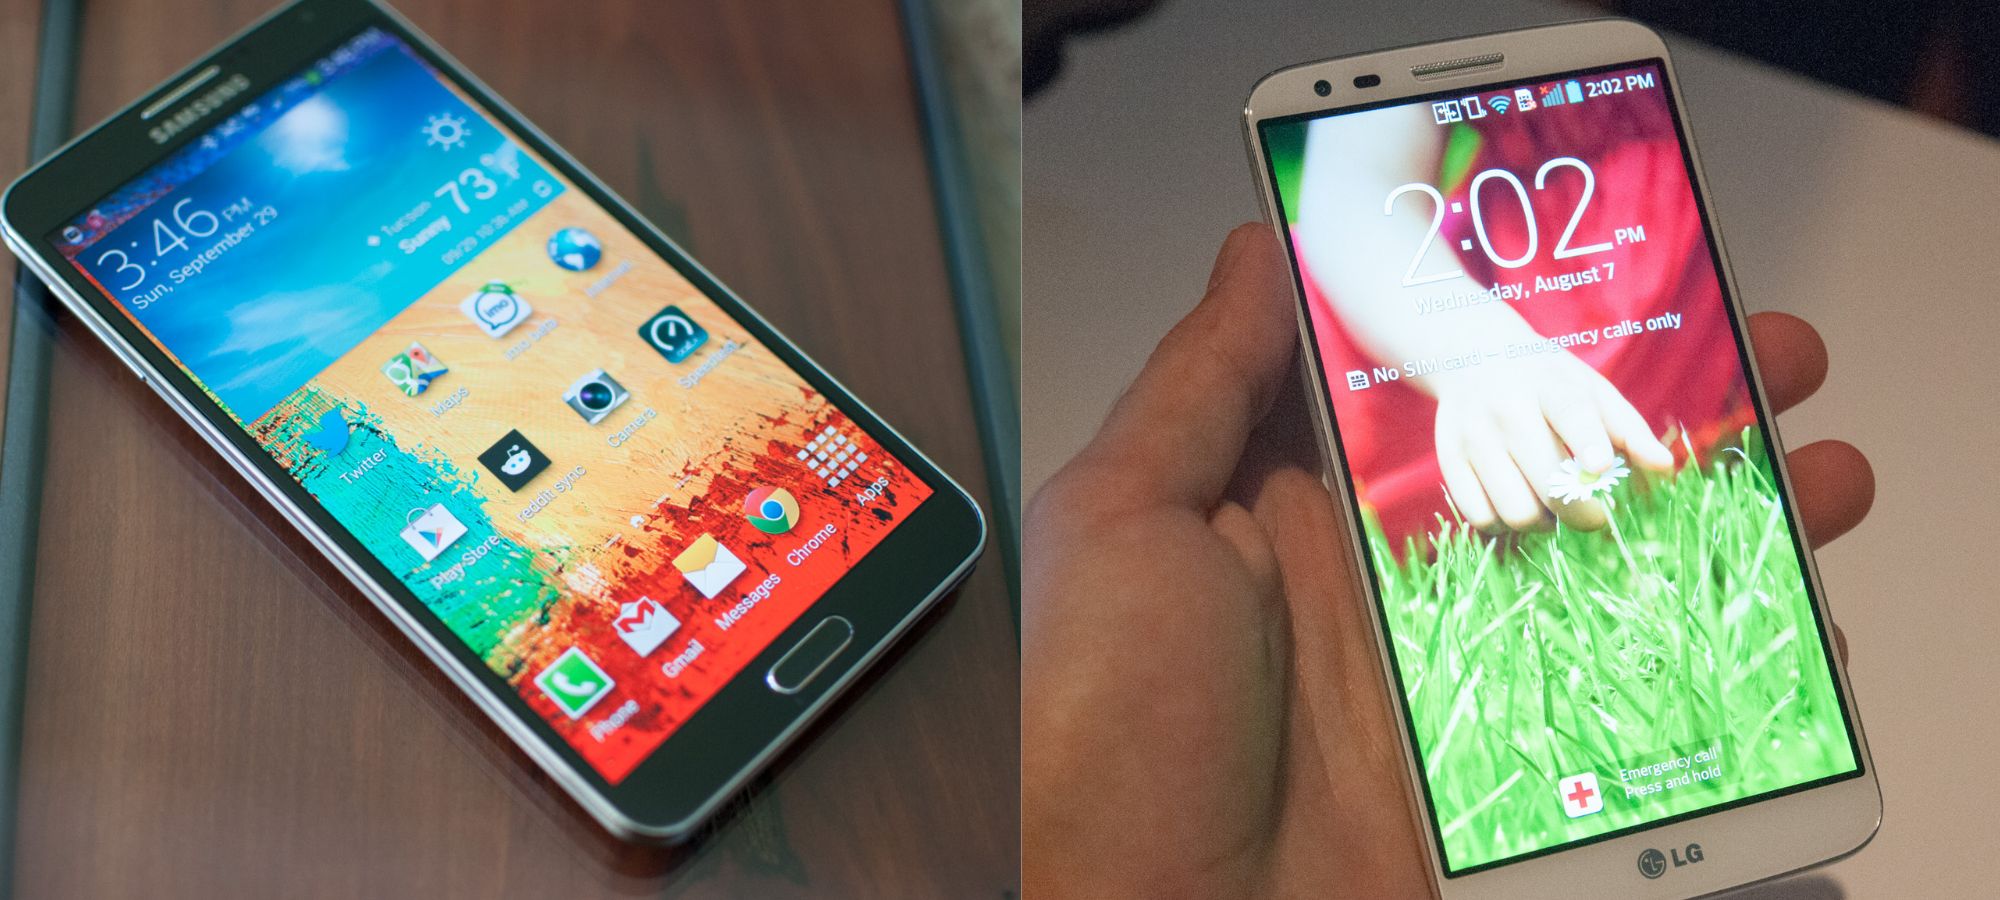 lg-g2-vs-galaxy-note-3-which-big-phone-is-best-for-you